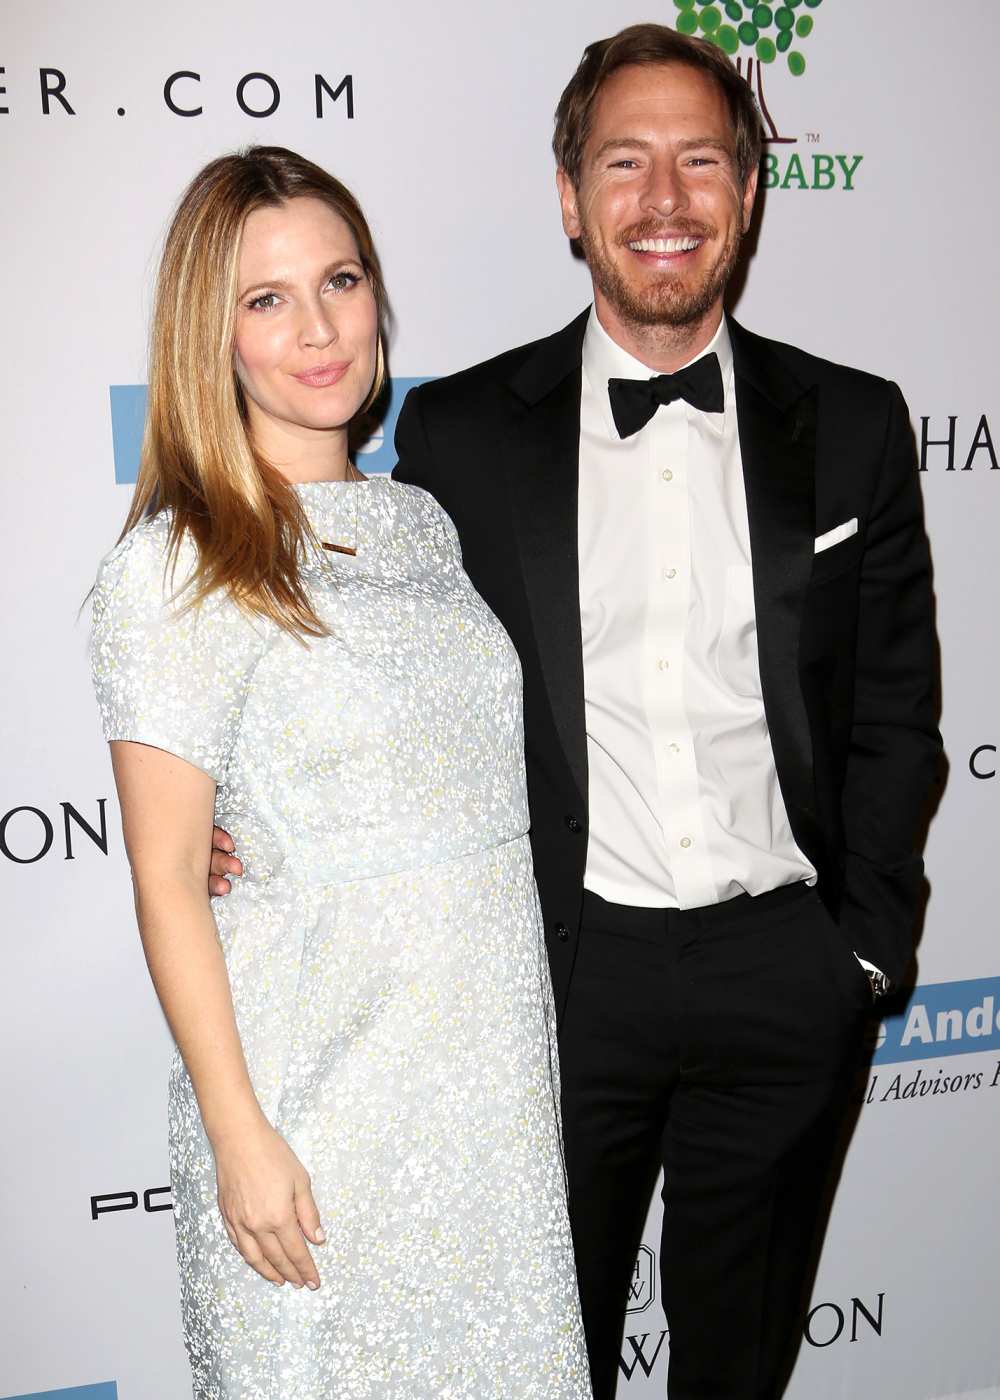 Drew Barrymore's Ex Will Kopelman Is Engaged to Vogue Fashion Director Alexandra Michler